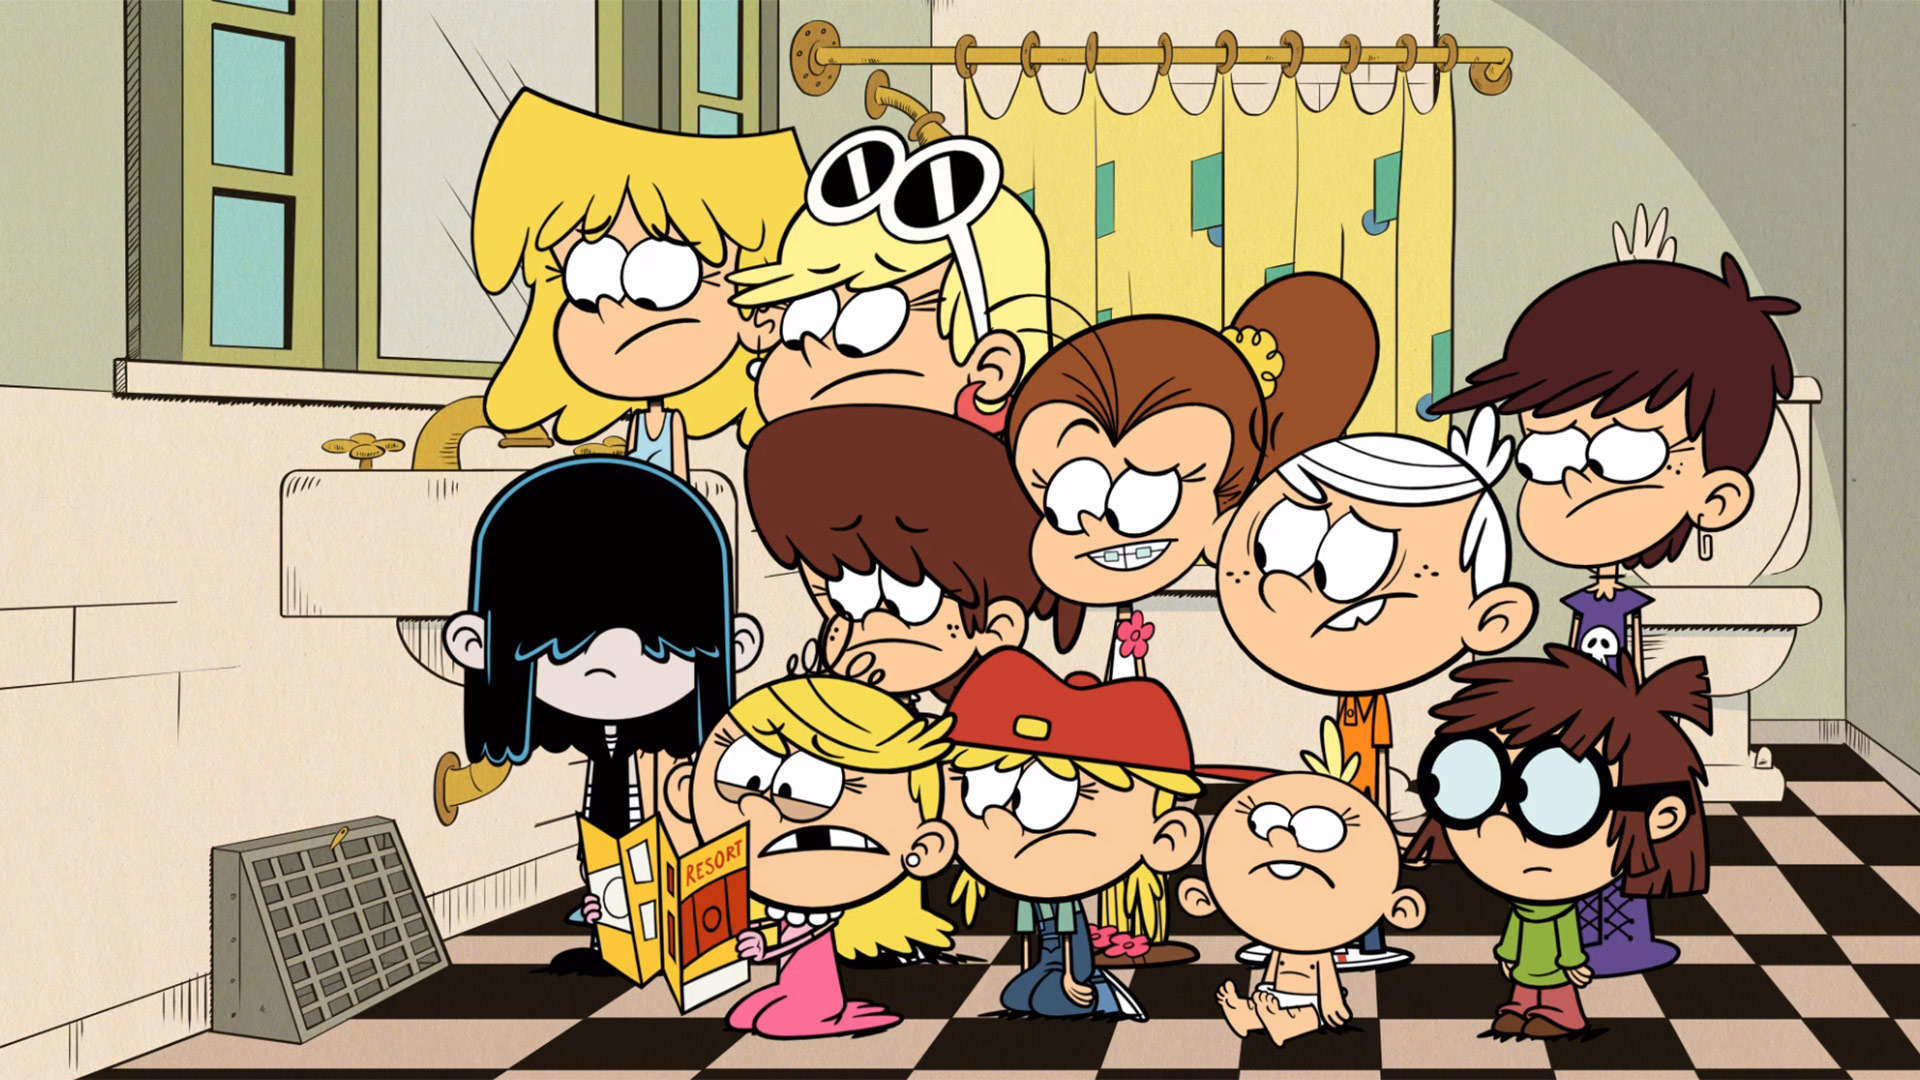 1920x1080 The Loud House Full Episodes, Suite and Sour/Back in Black: Season 2,  Episode 4